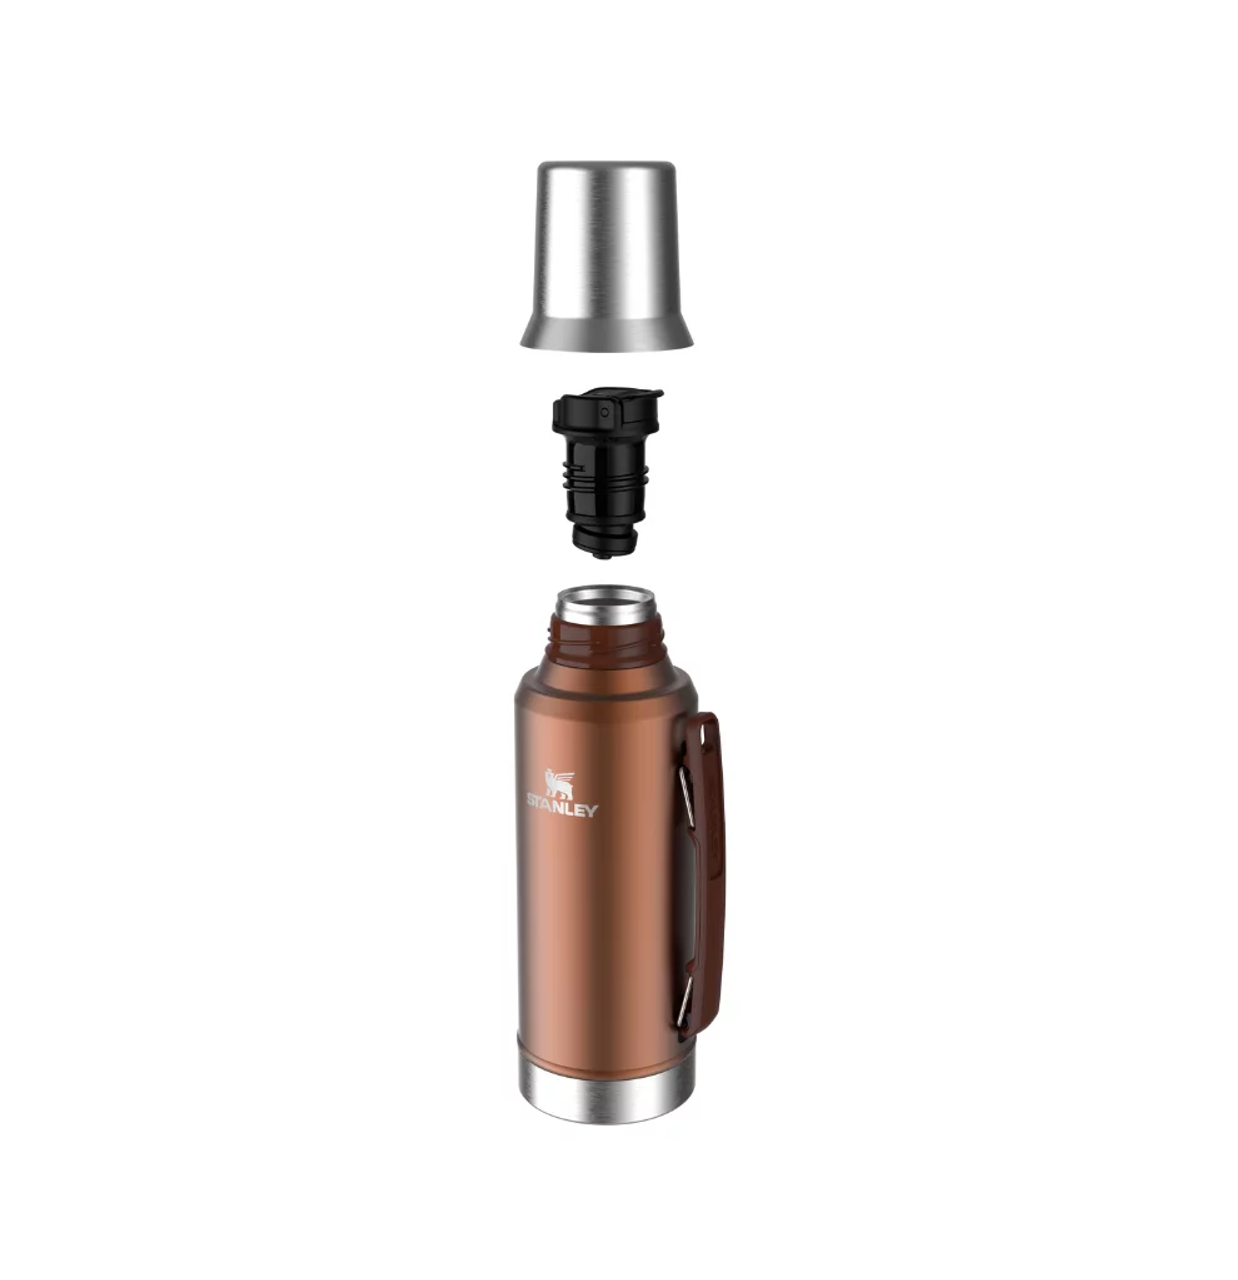 Stanley Mate System Termo Original con Tapón Cebador Thermos Bottle for Mate  Bronze Colored Design, 1.2 lts / 40.57 fl oz - Pampa Direct